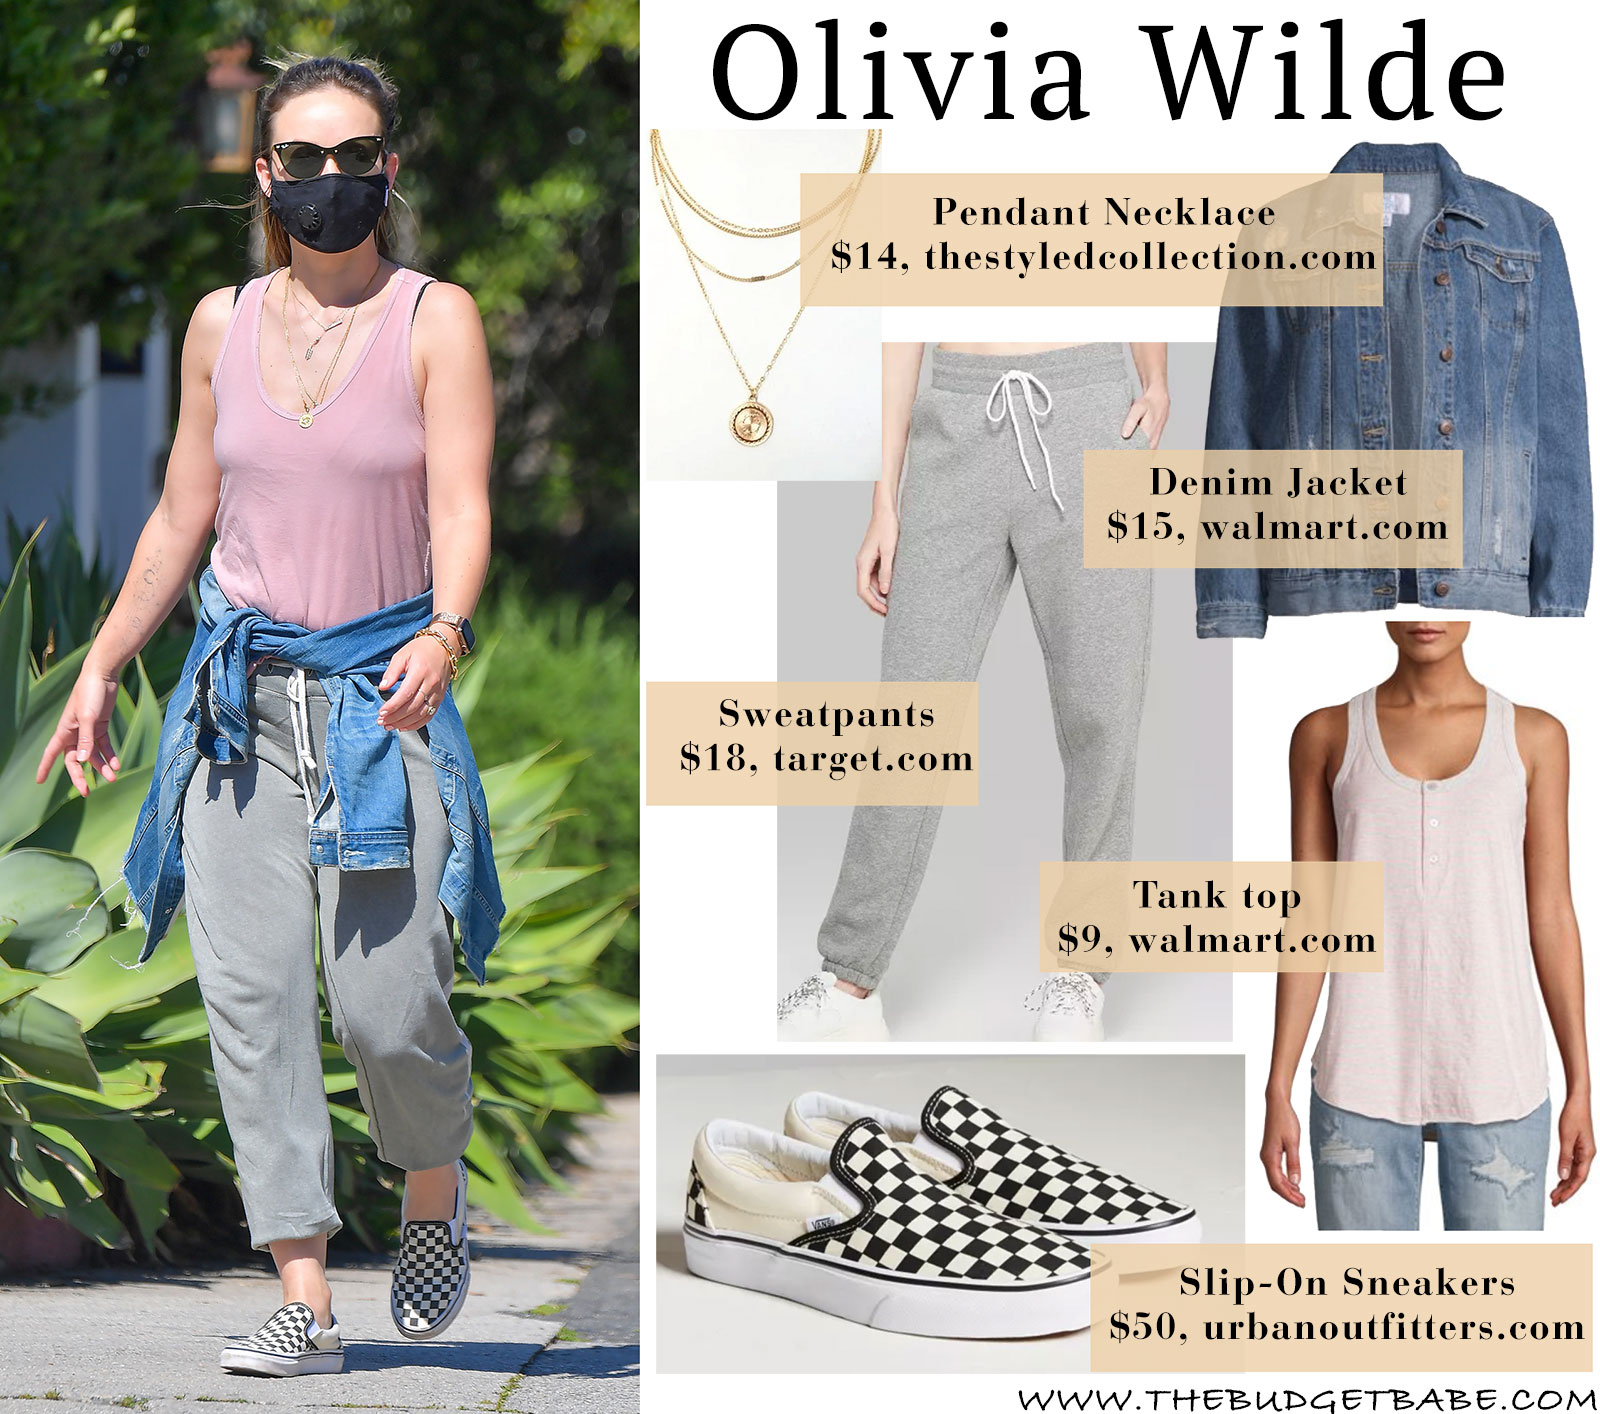 Olivia Wilde's social distancing look - so comfy and cute